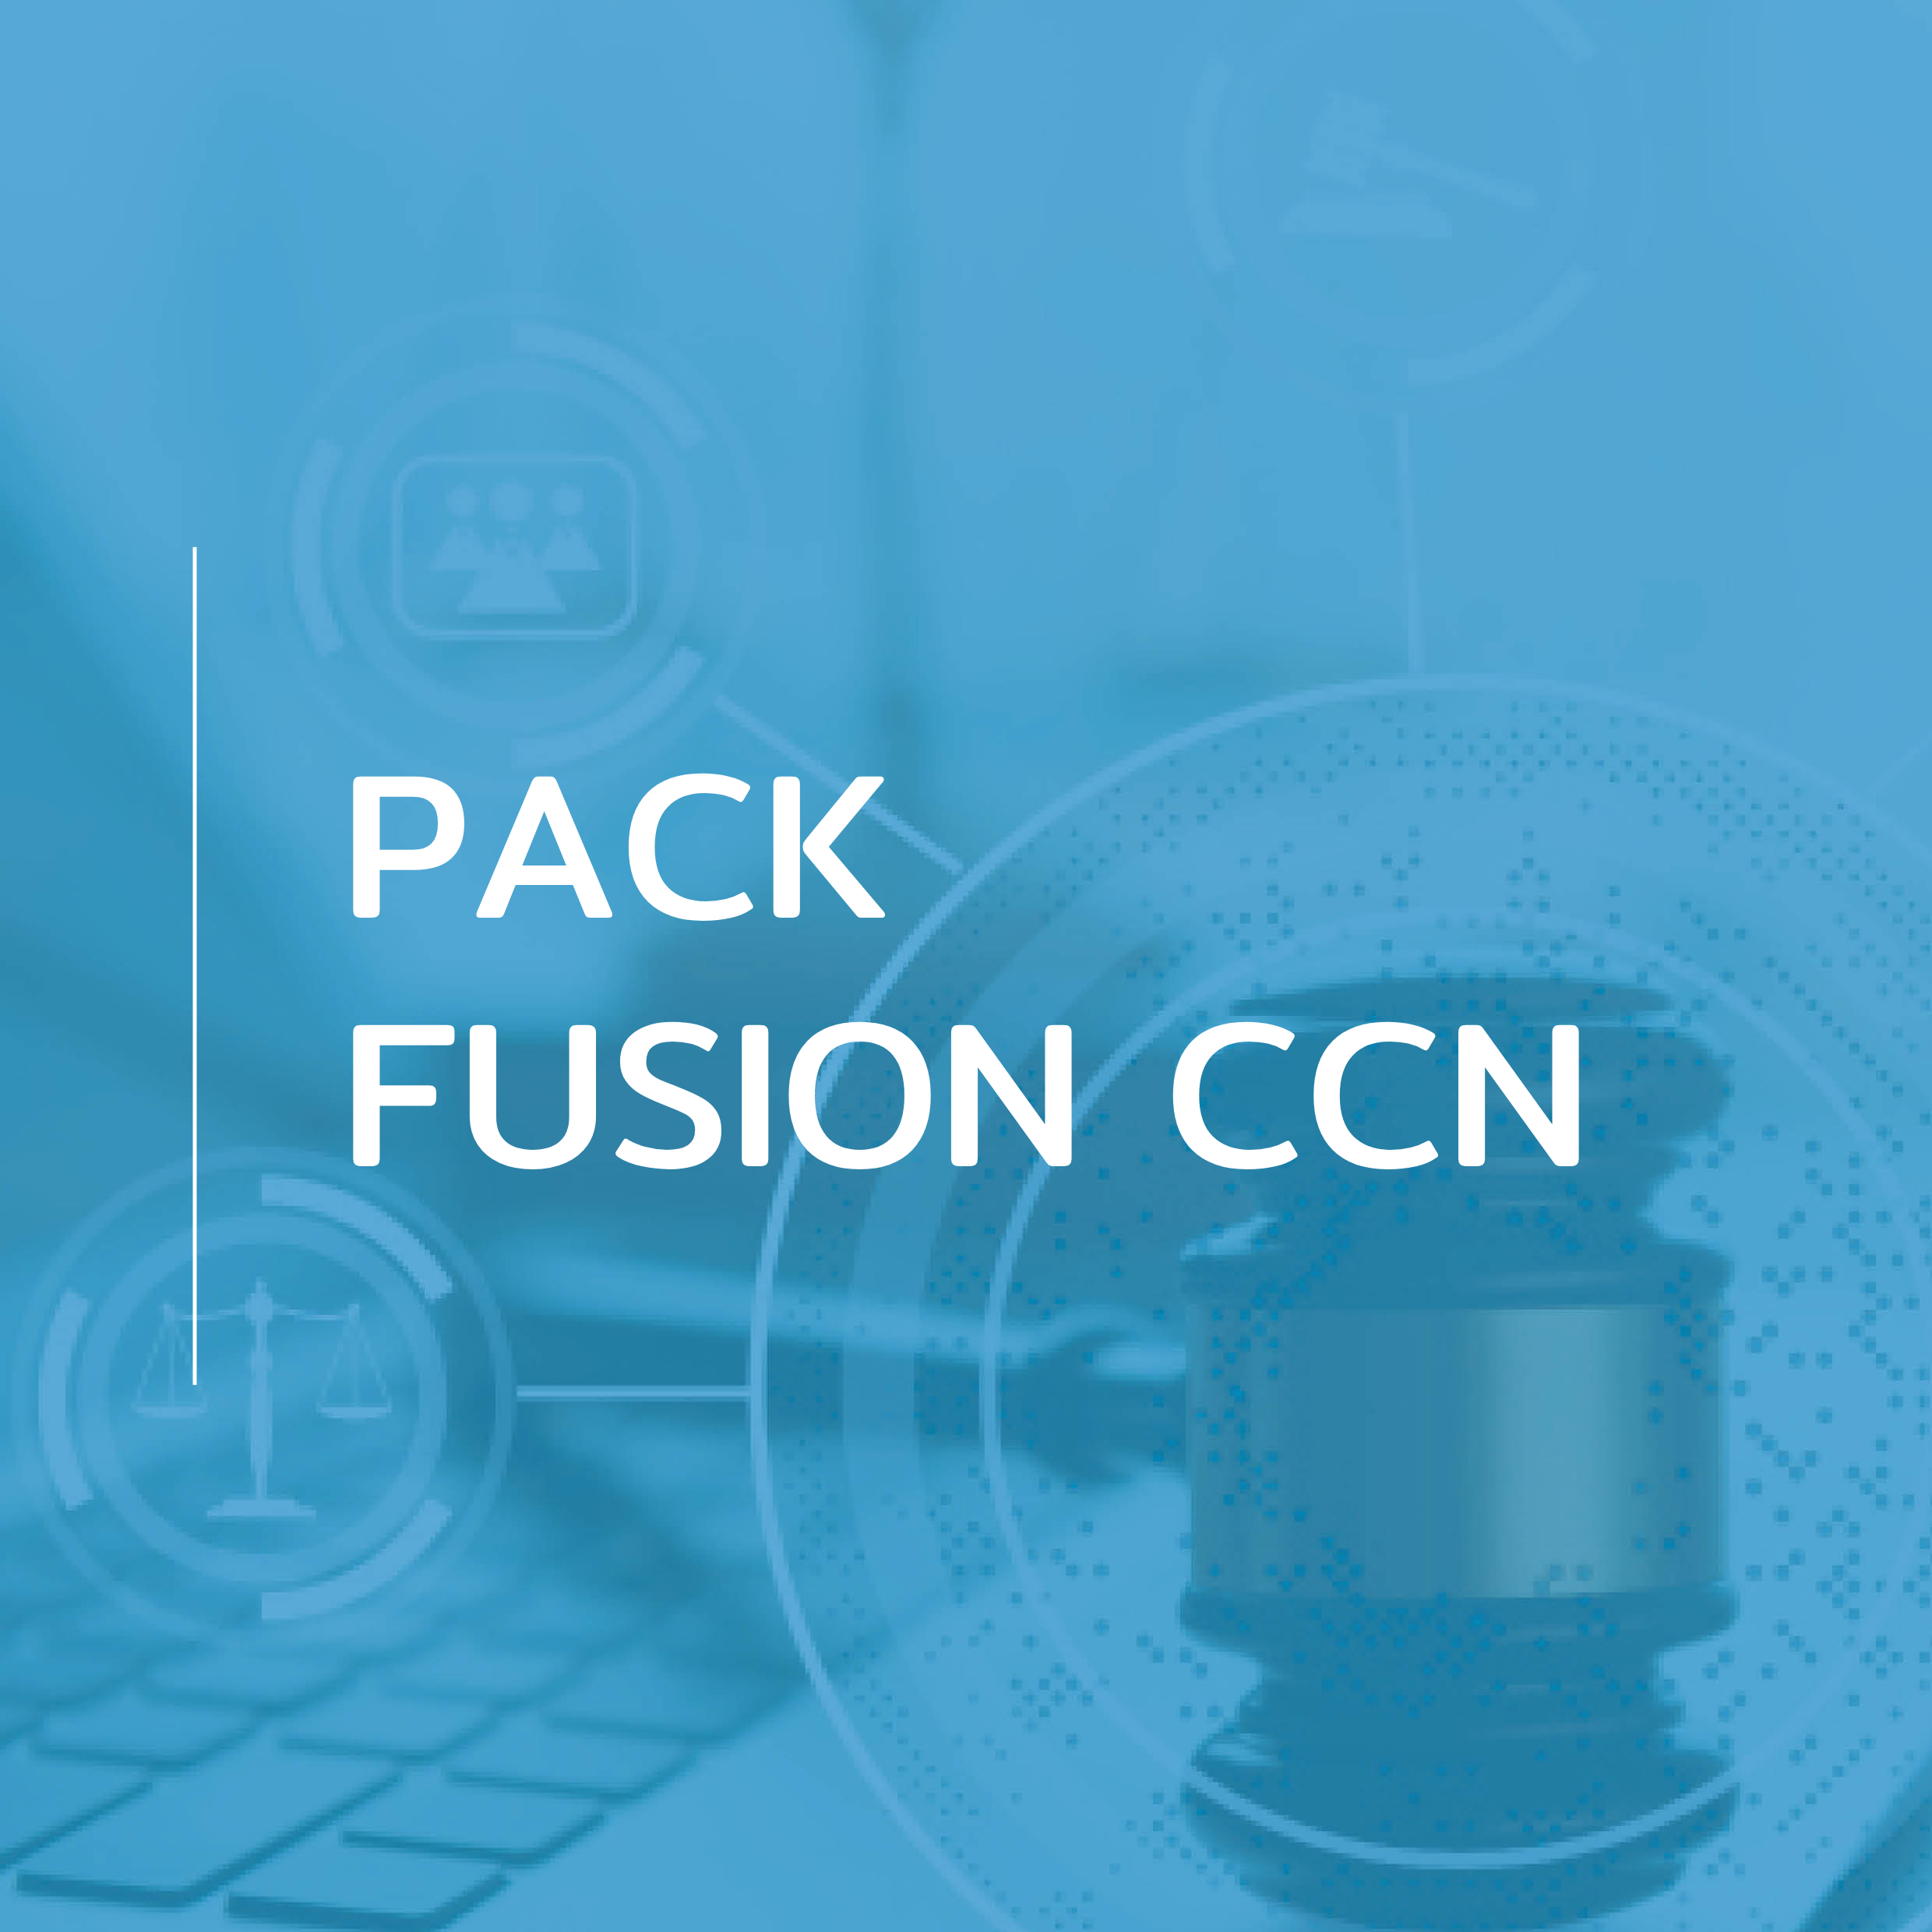 PACK FUSION CCN